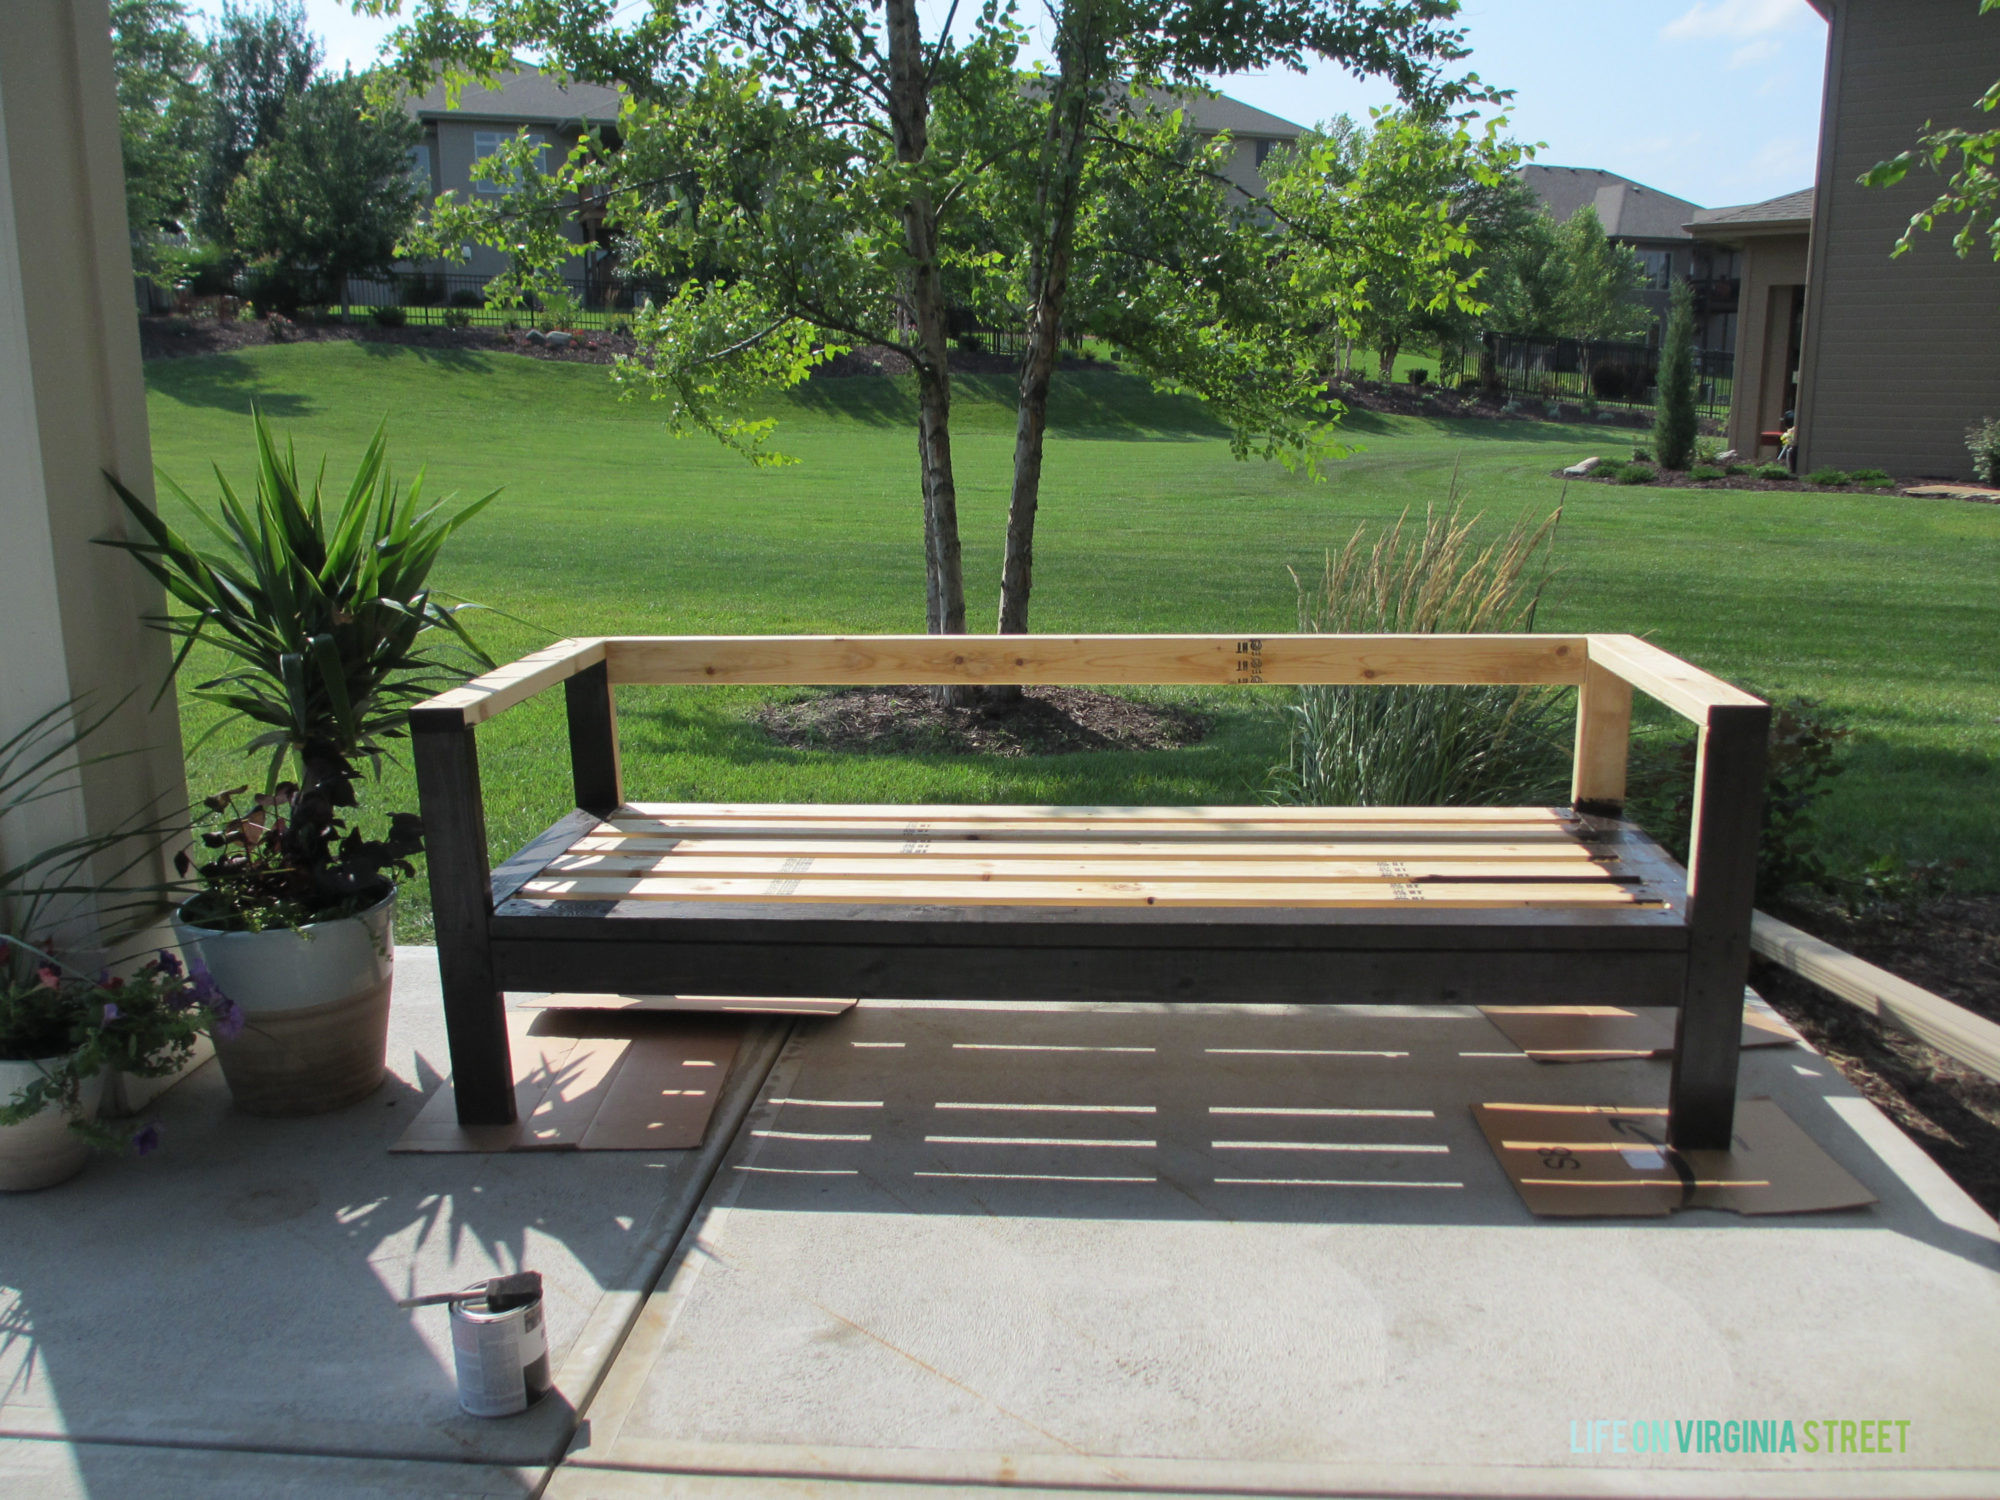 DIY Outdoor Sectional 2X4
 How to Build a DIY Outdoor Couch